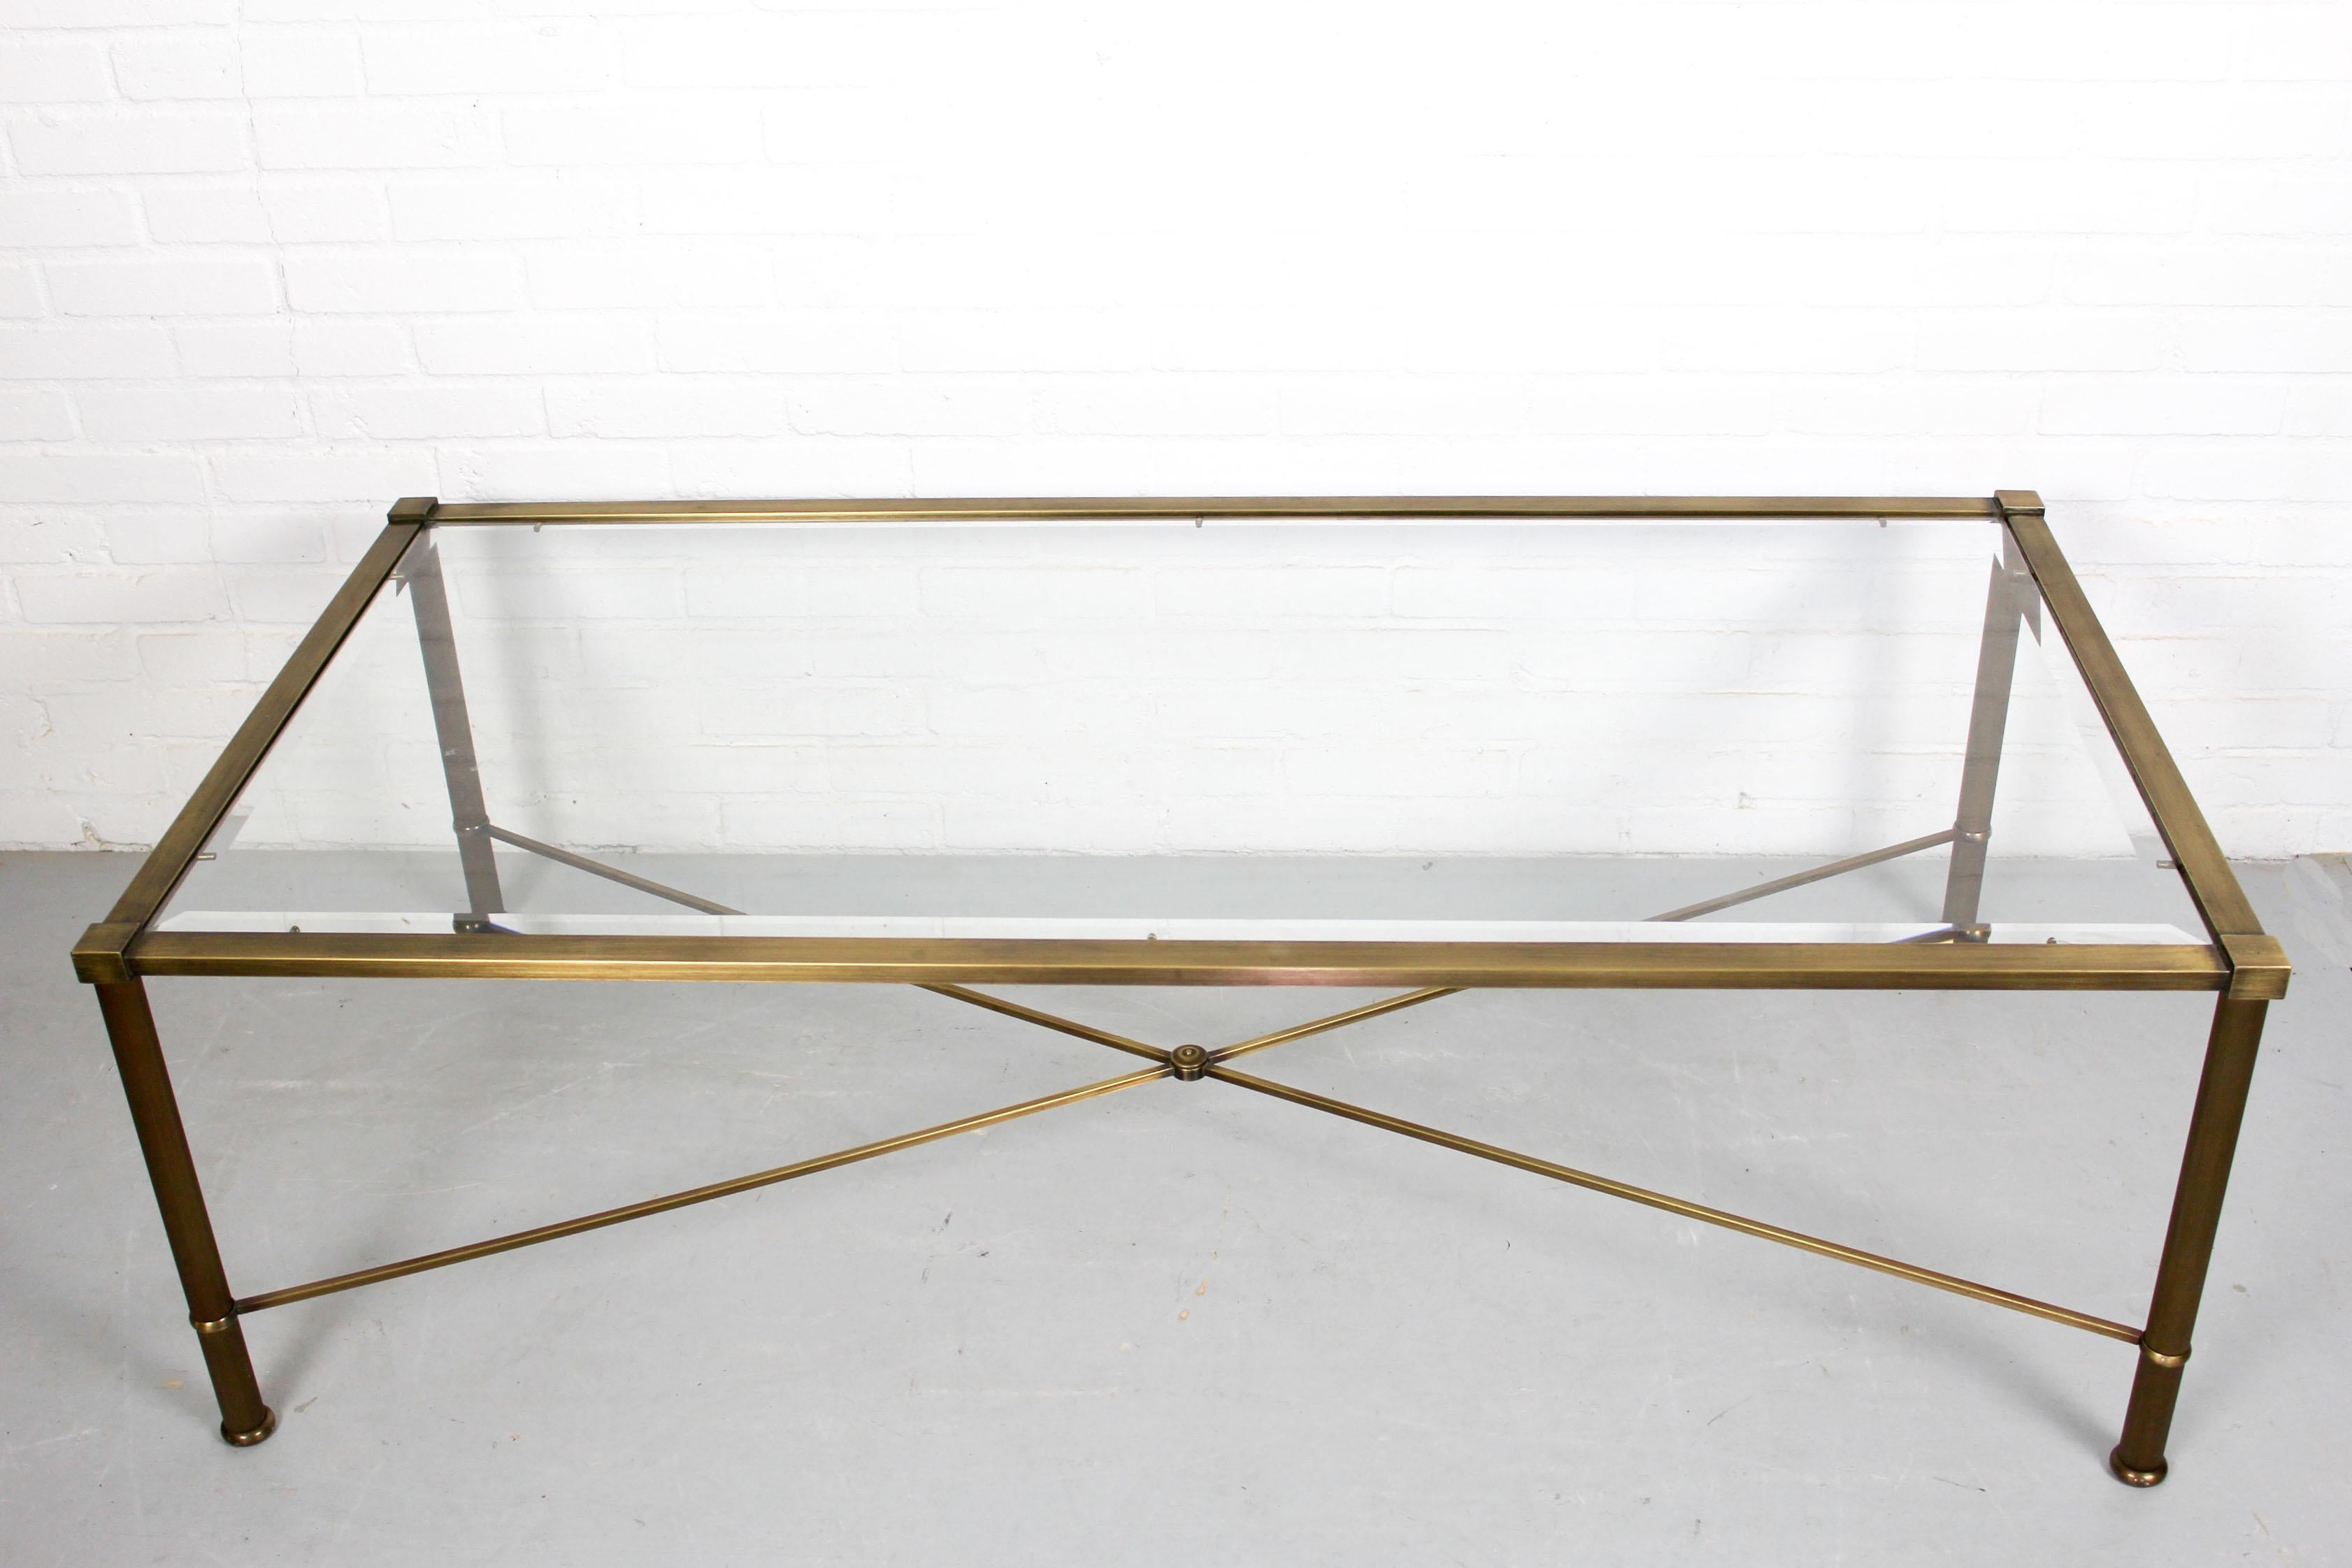 A very stylish and beautiful vintage side tables with glass top, this table date from the 1960s. The condition is great for its age, the metal is painted in brass-look and the glass shelve with facet edges has no chips or cracks.